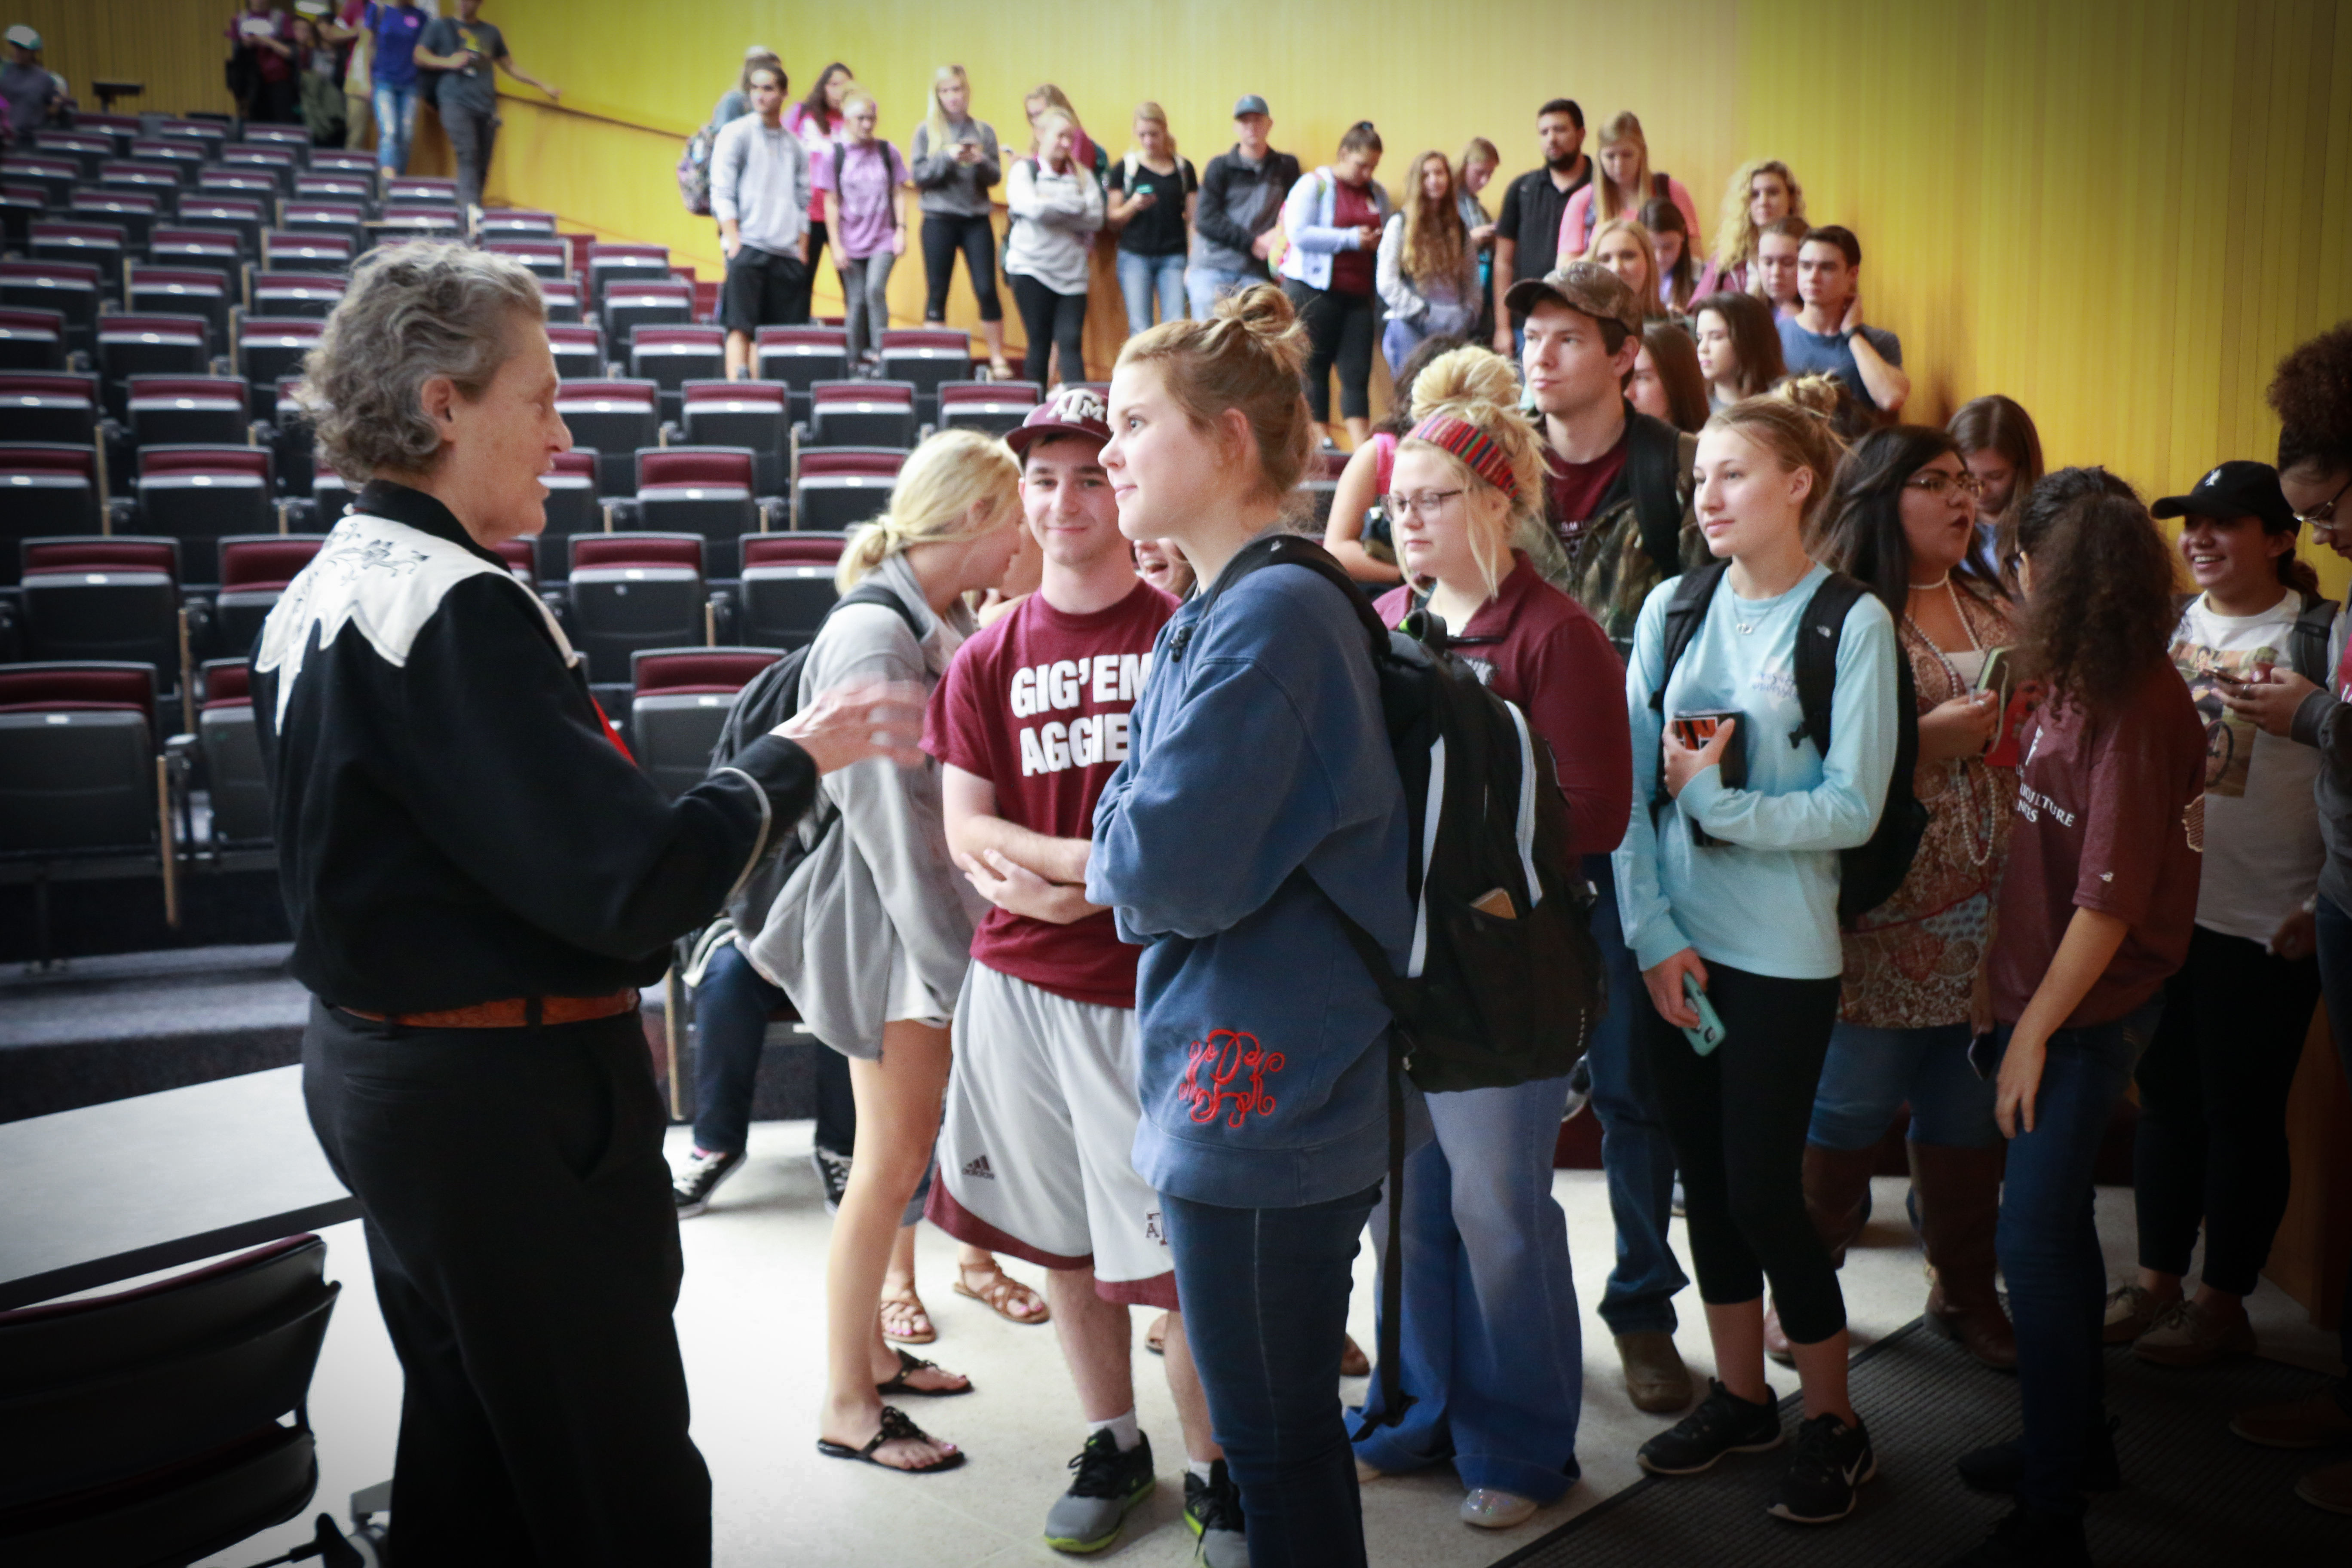 Students lining up for photographs and autographs with Dr. Grandin